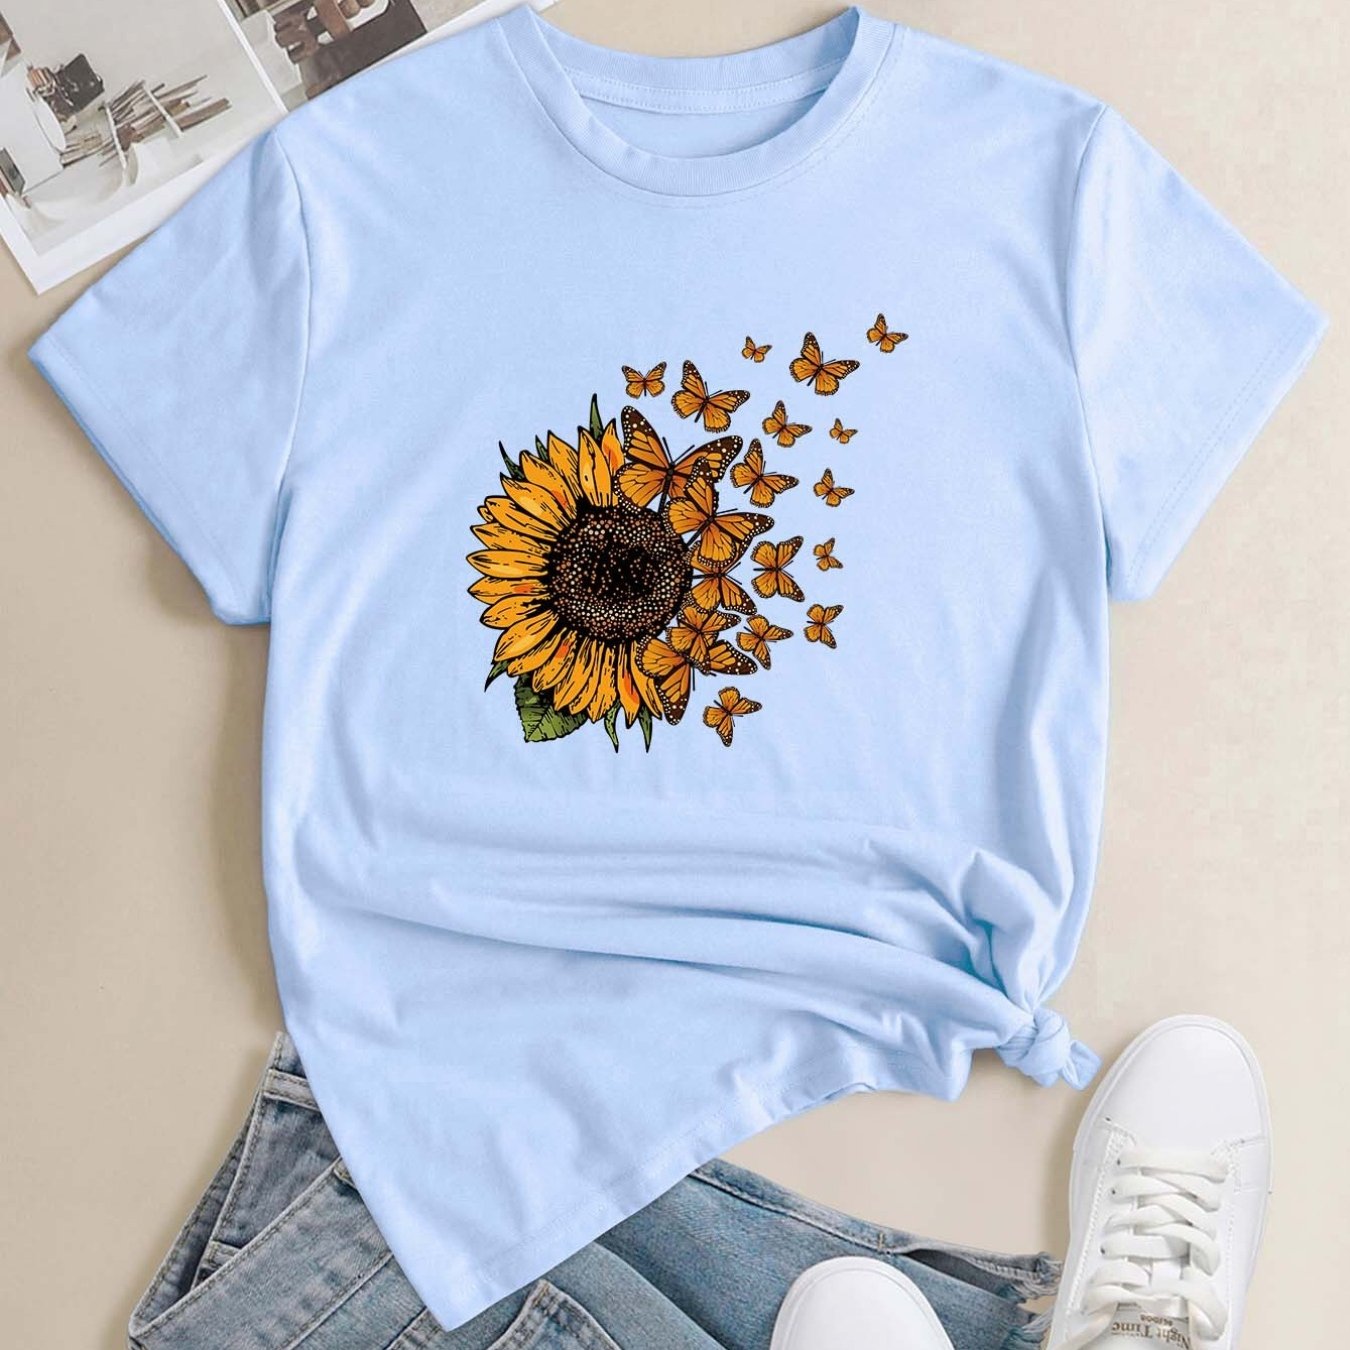 Sunflower Butterfly Print Crew Neck T-shirt, Casual Loose Short Sleeve  Fashion Summer T-Shirts Tops, Women's Clothing